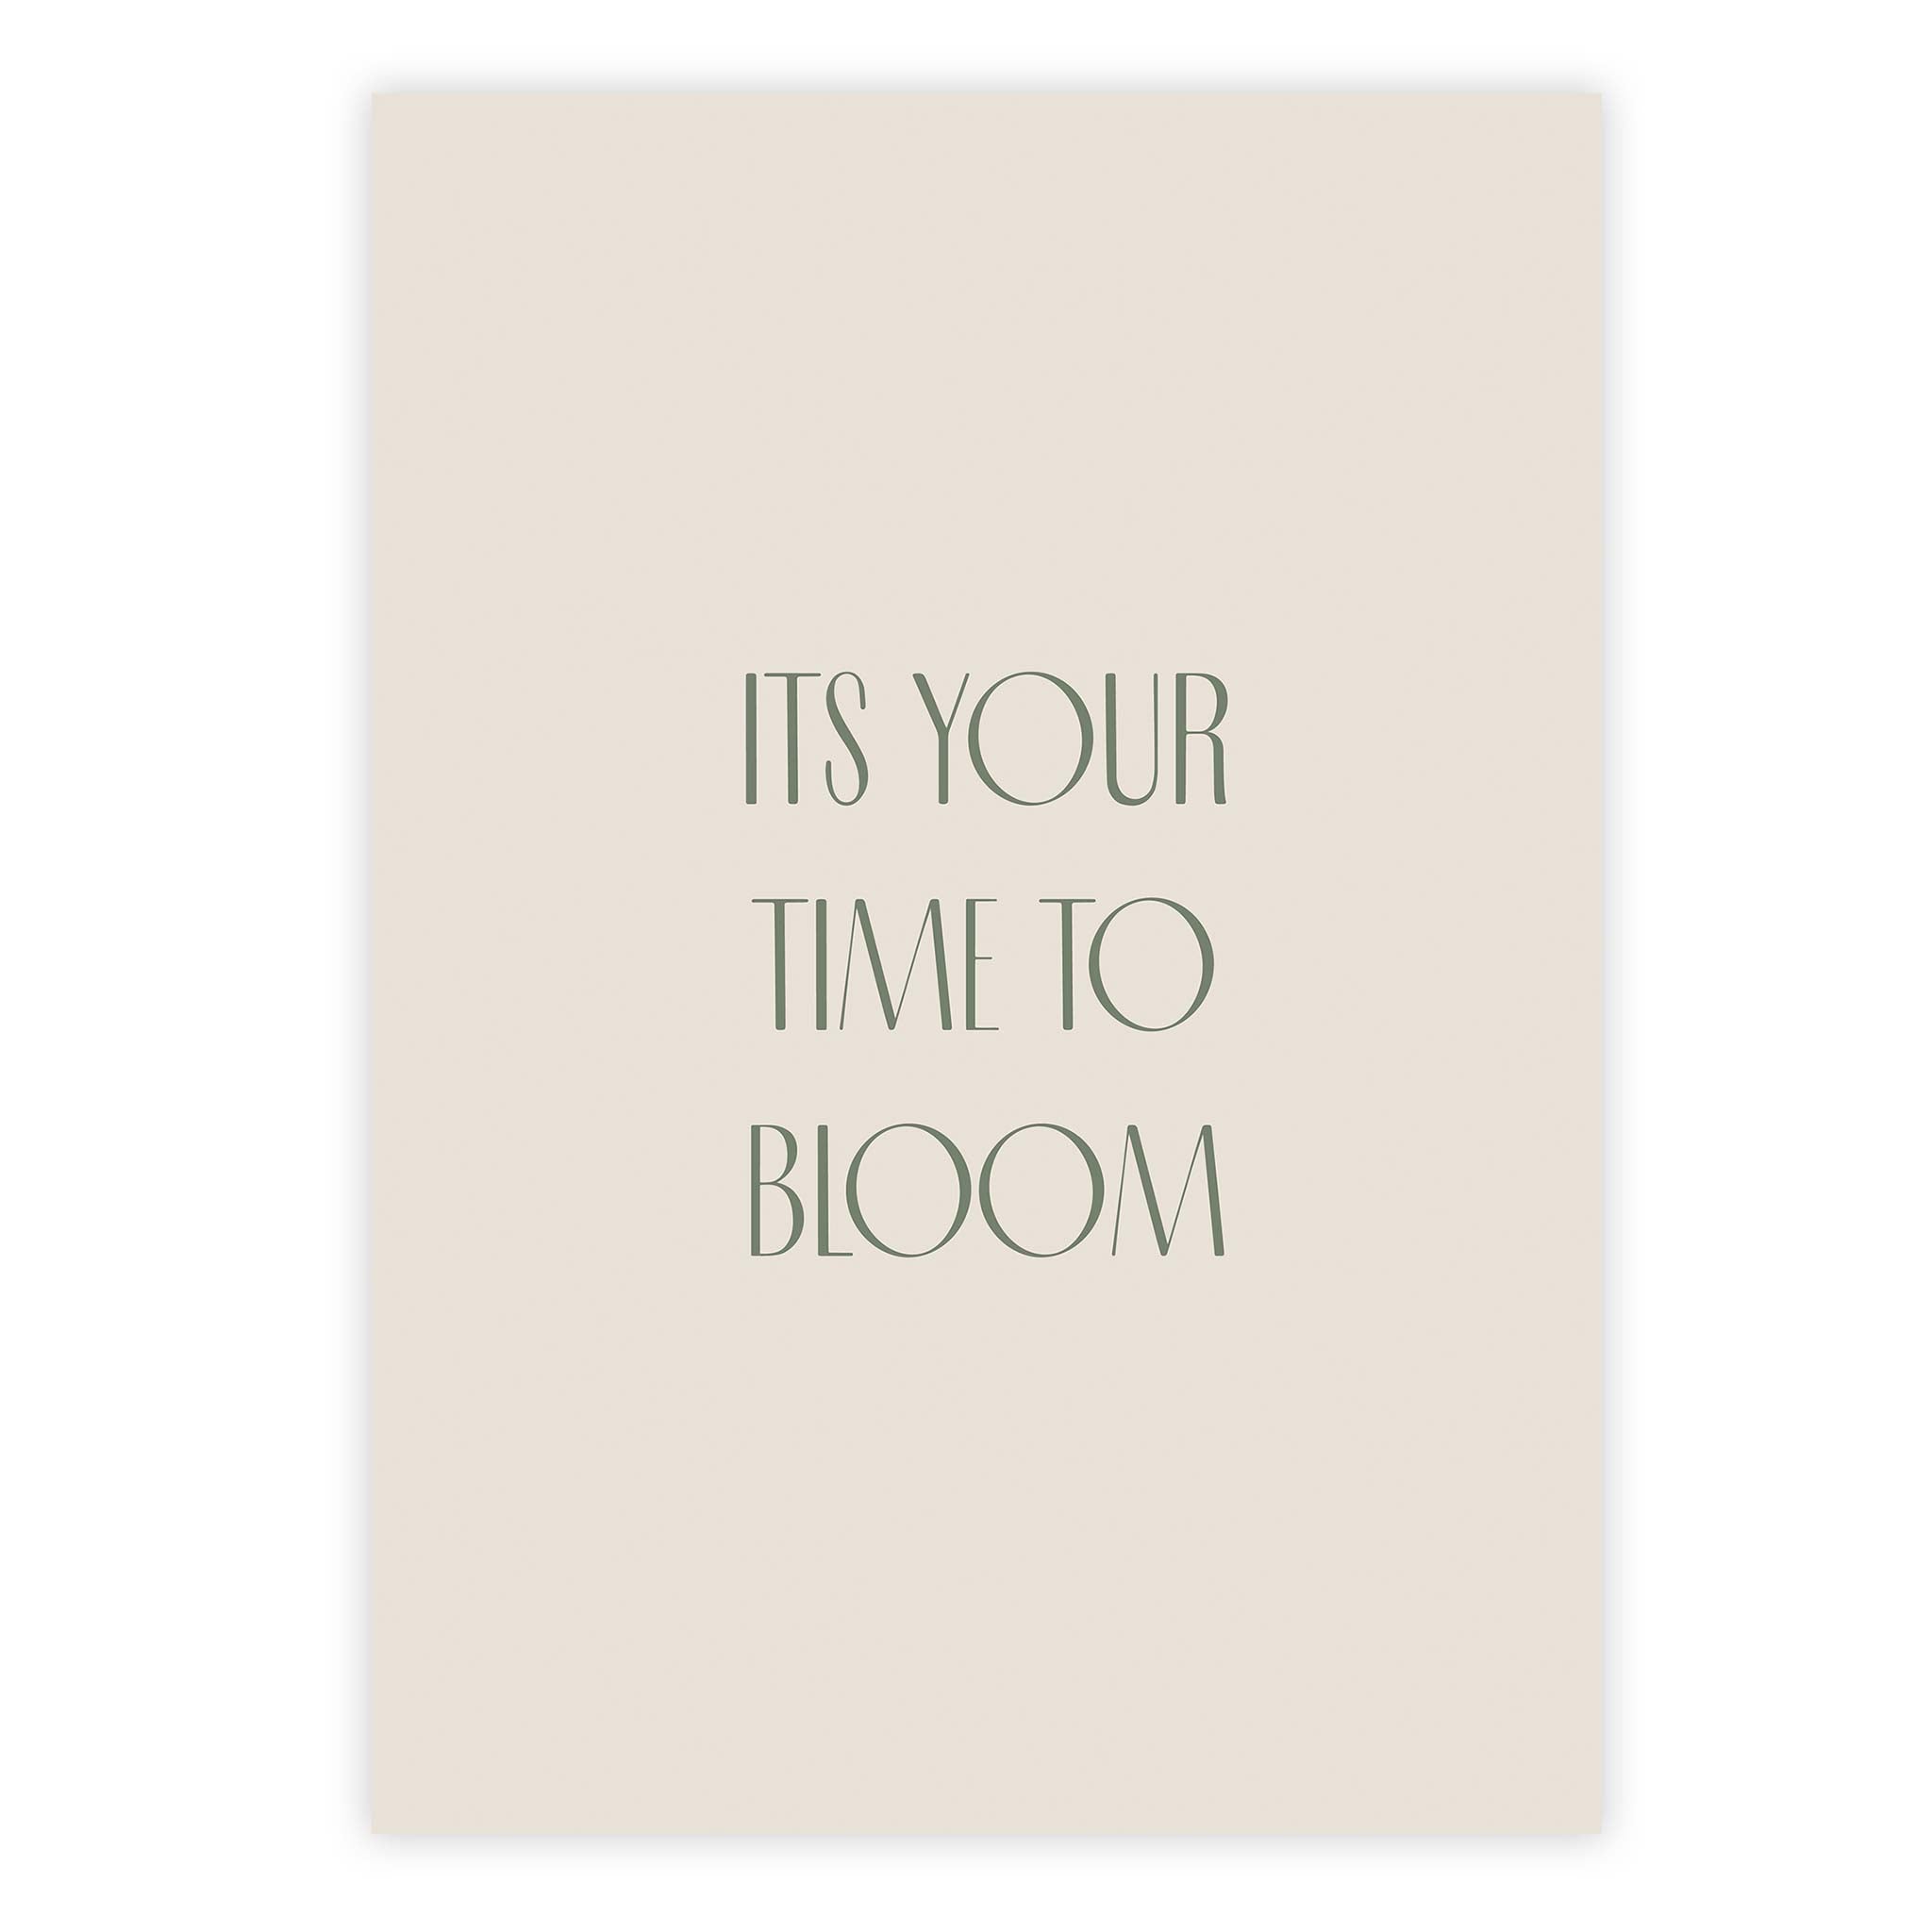 Its your time to bloom